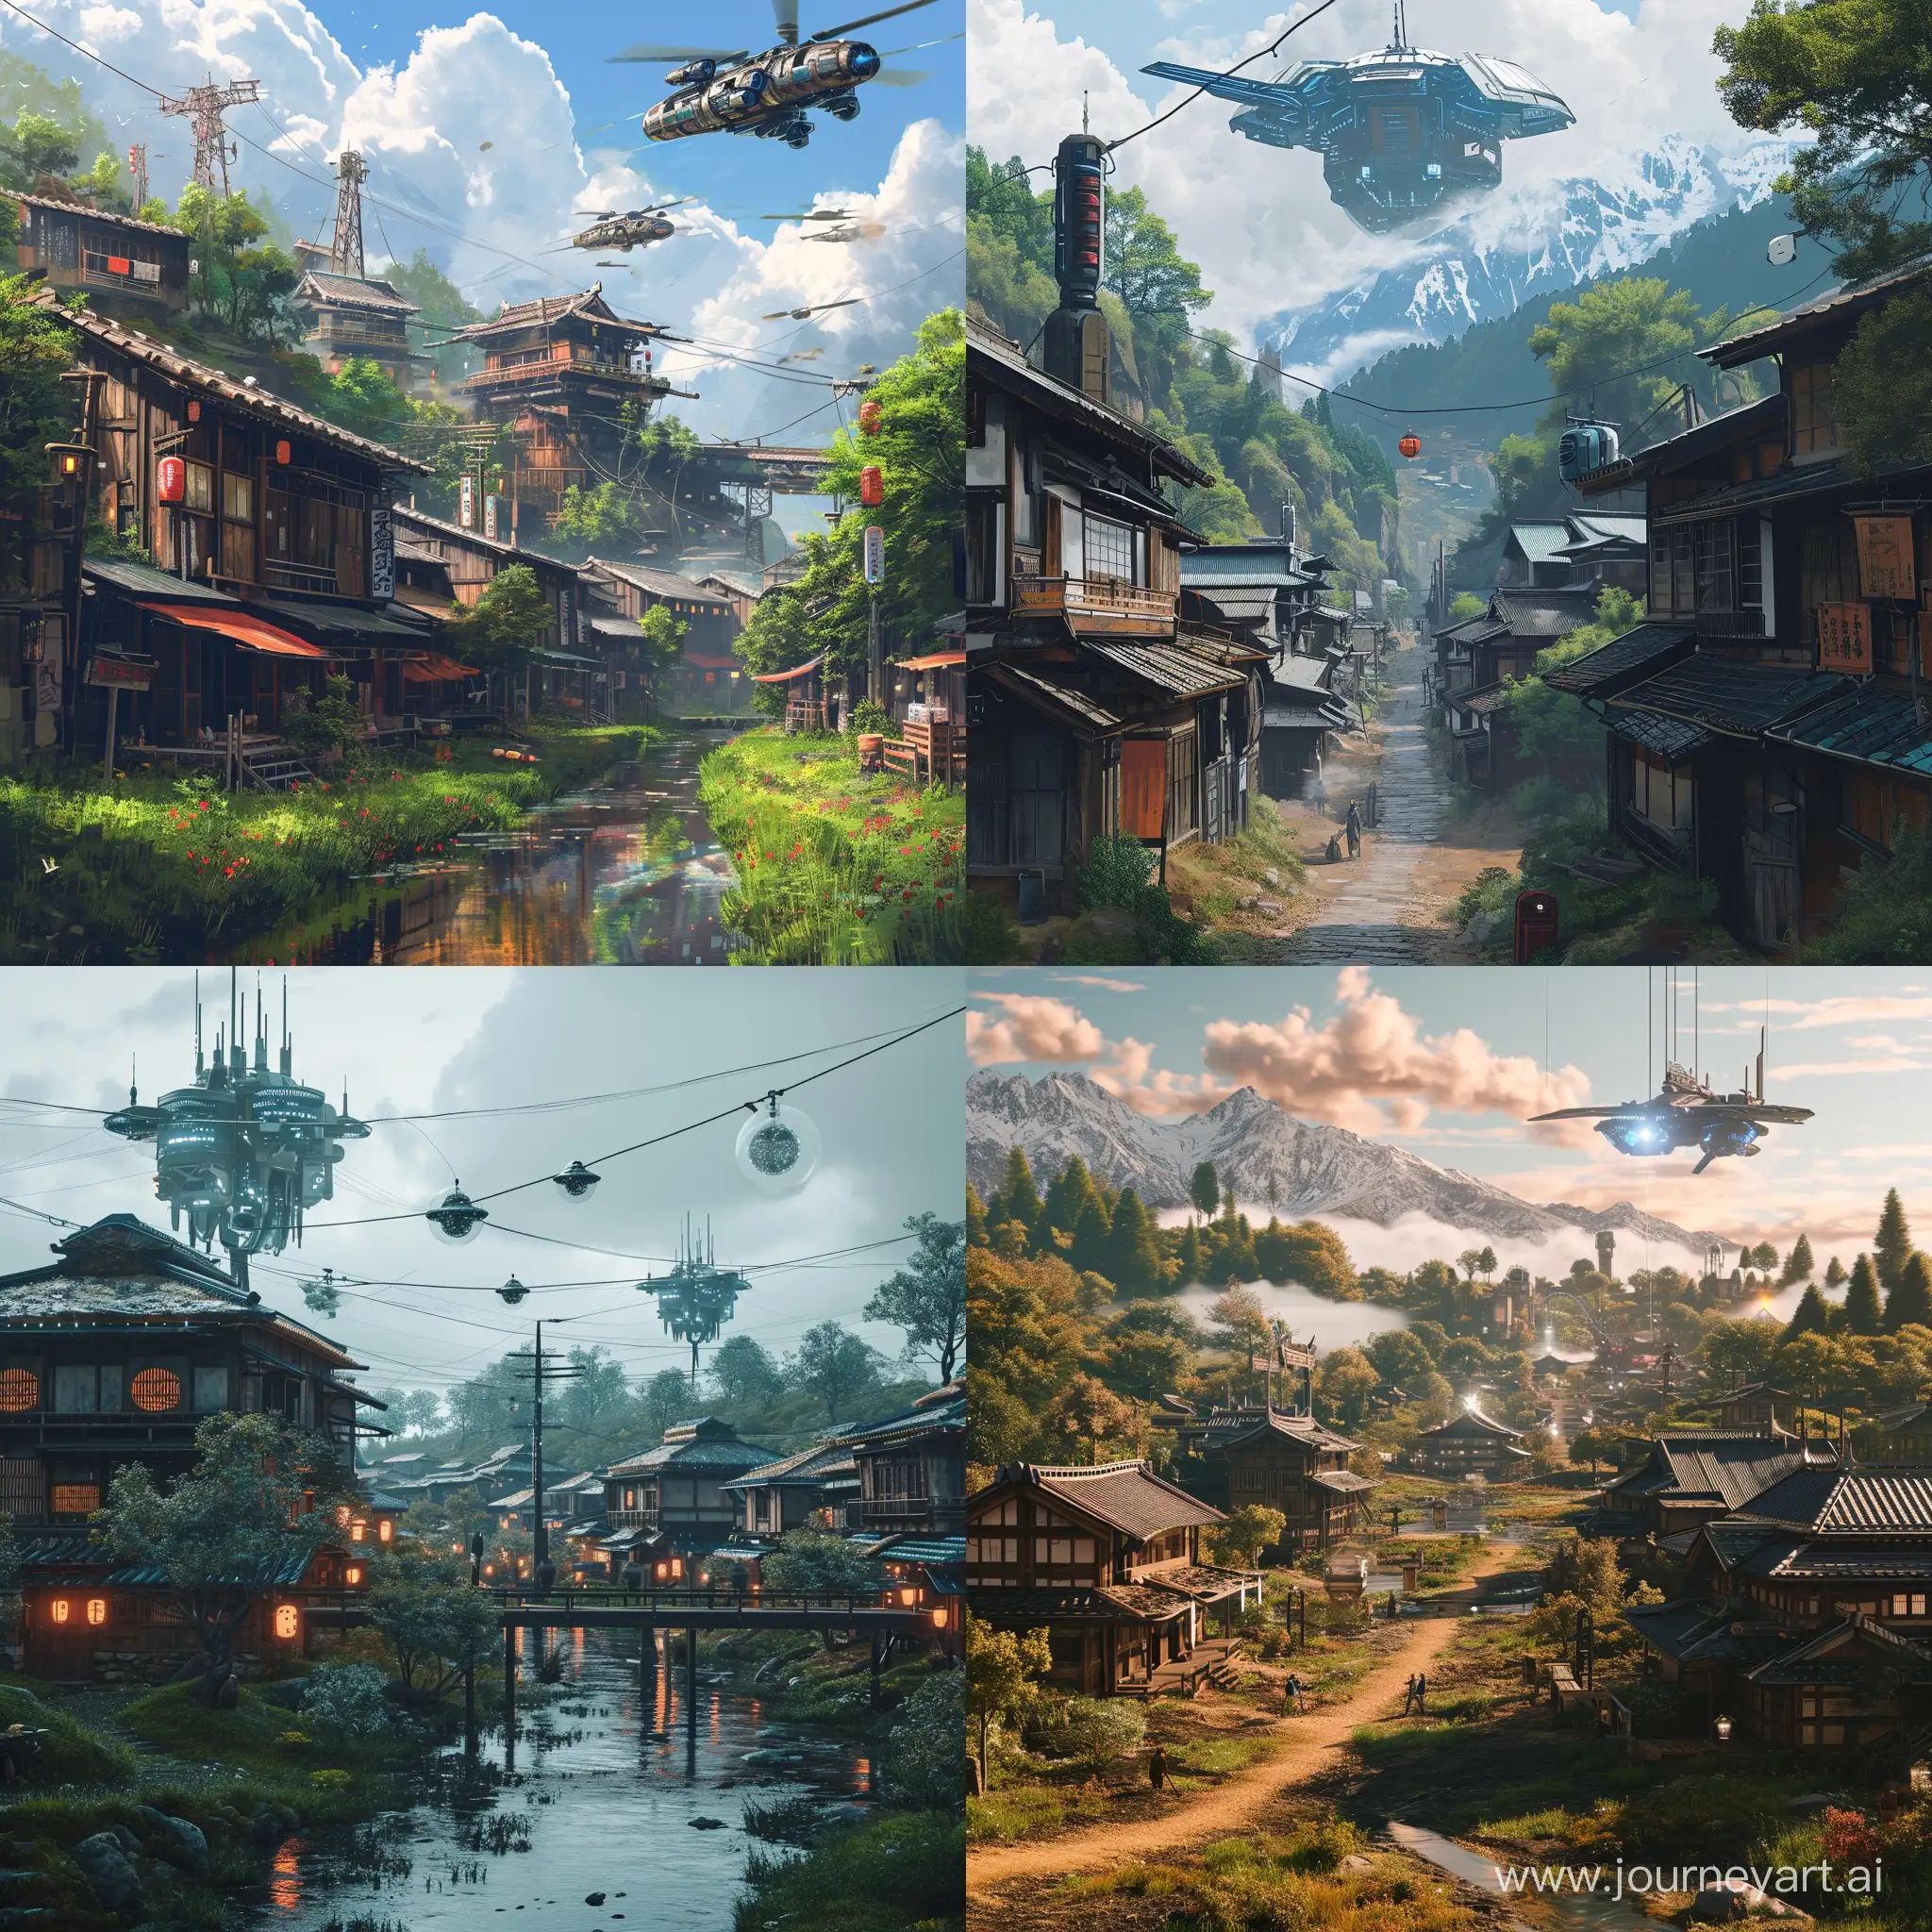 Tranquil-Feudal-Japan-Village-Blends-with-Futuristic-SciFi-Technology